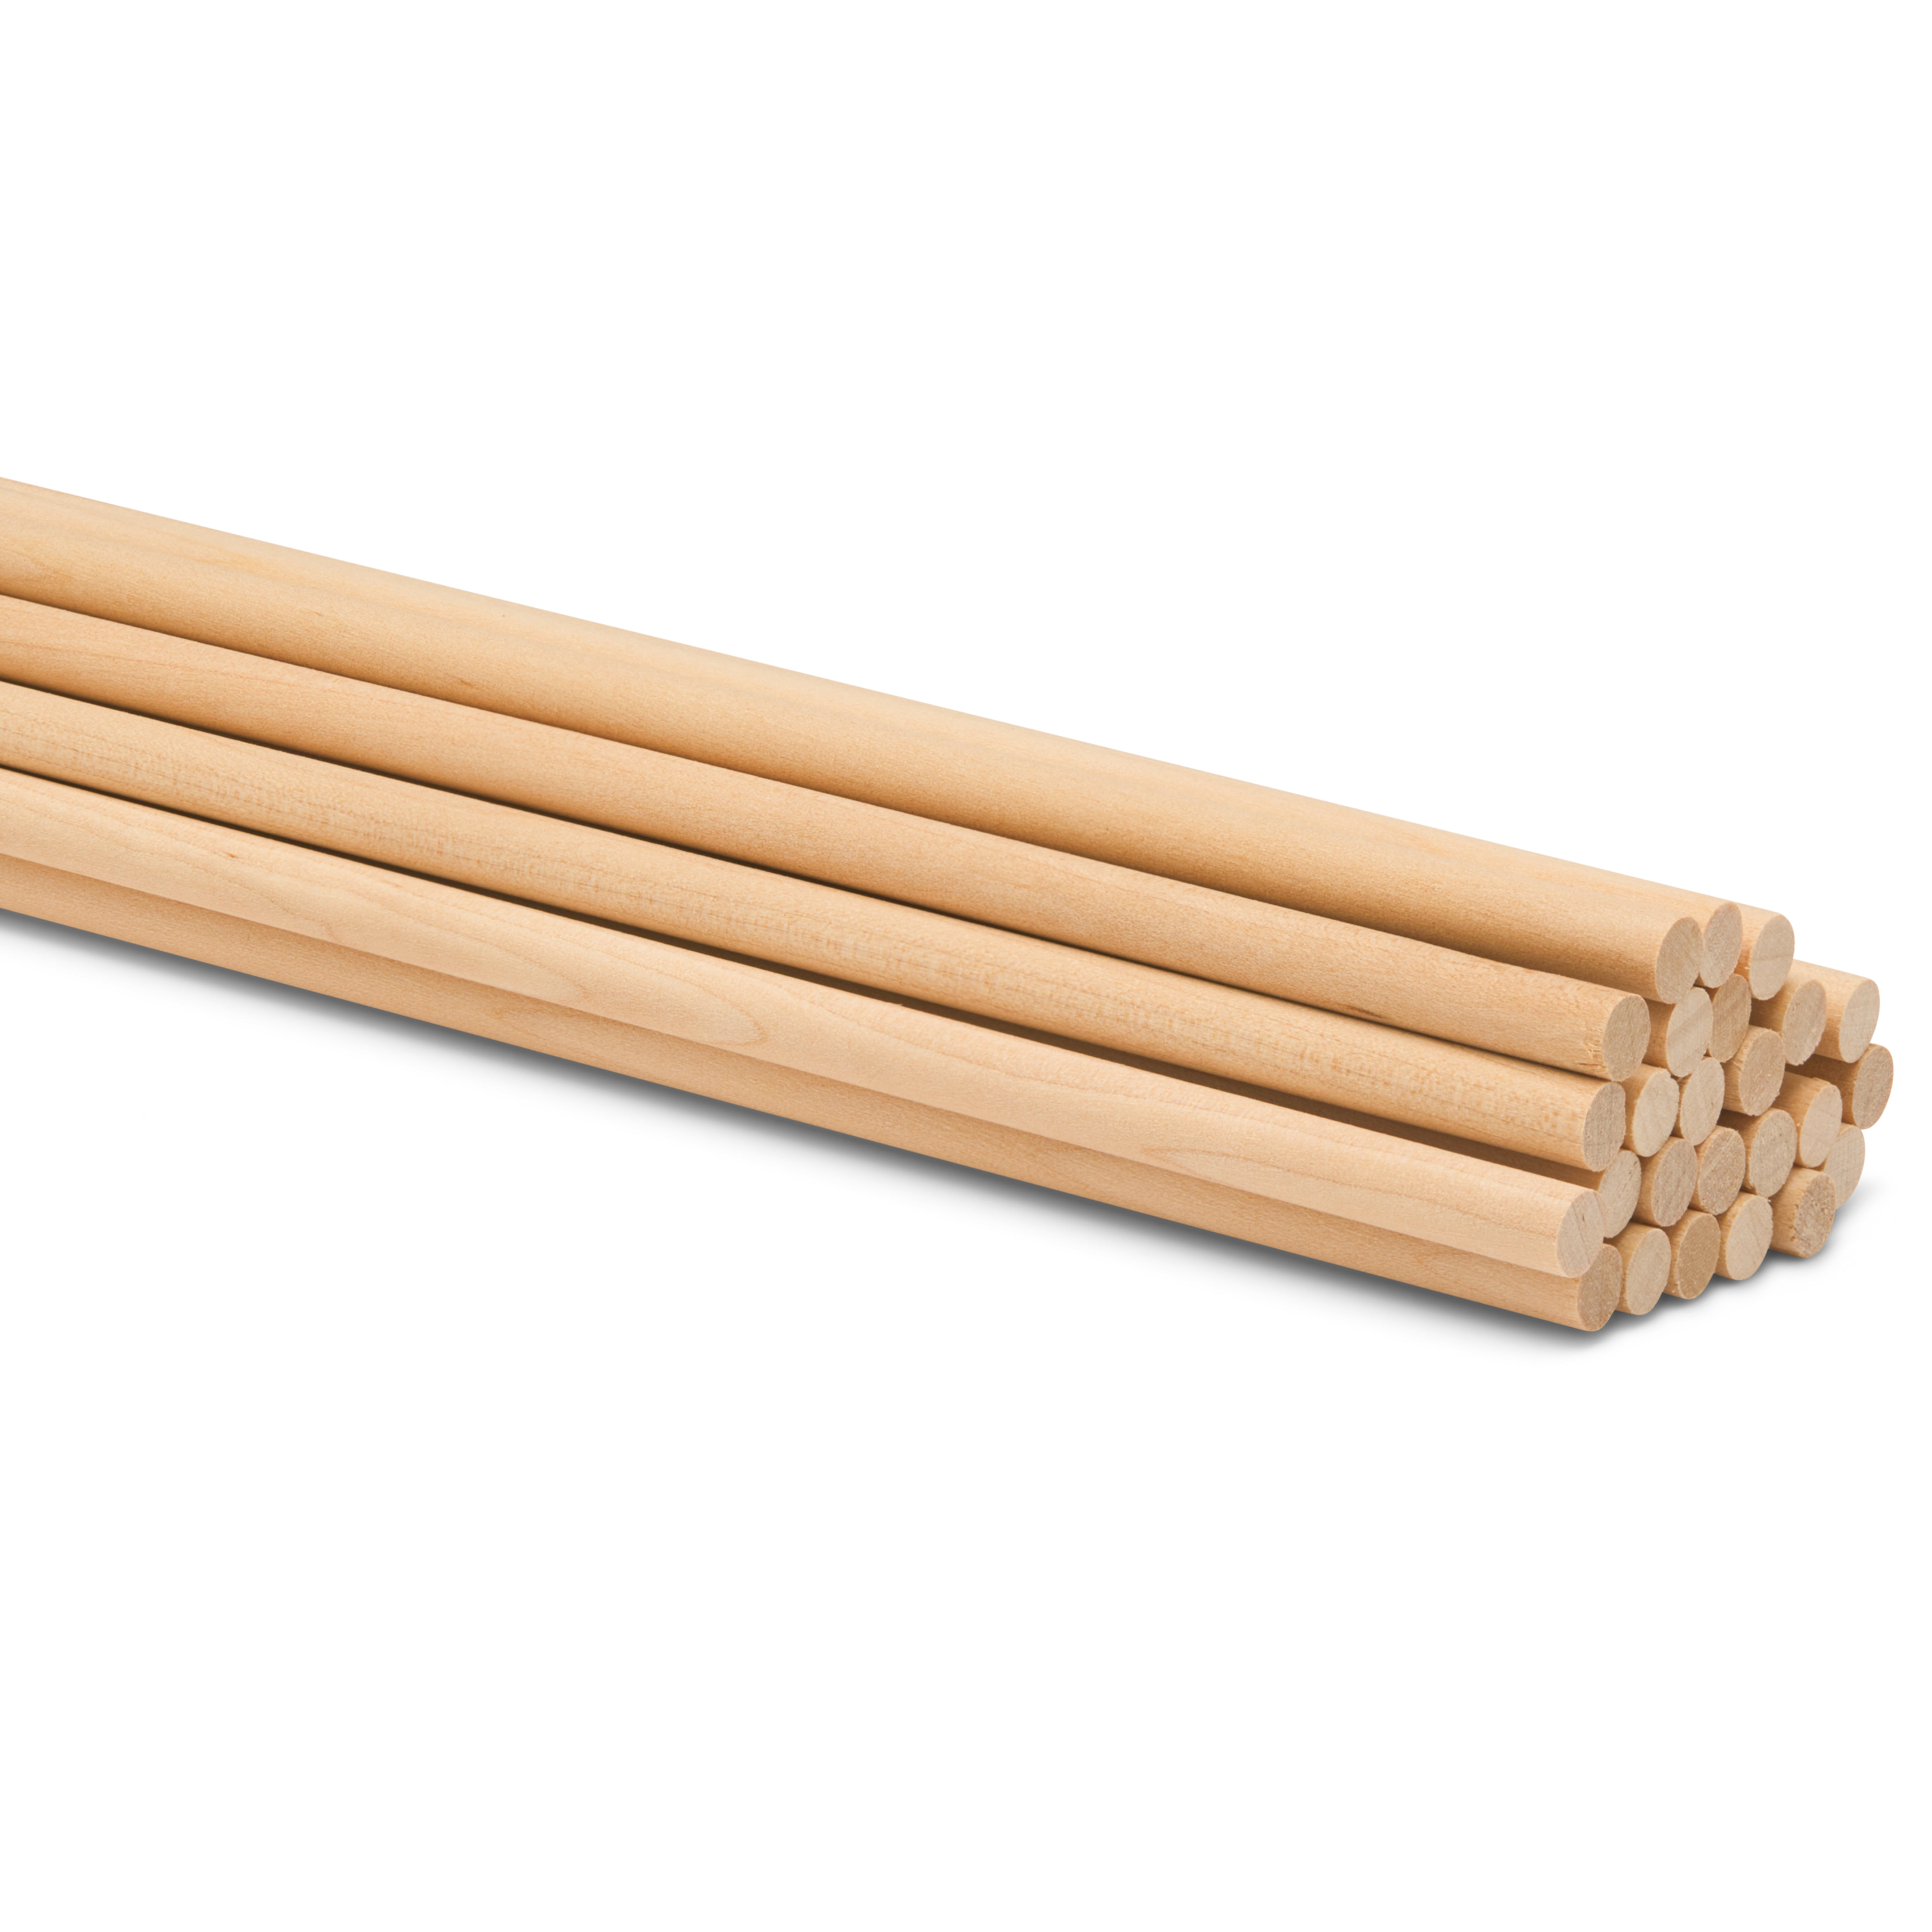 Dowel Rods Wood Sticks Wooden Dowel Rods - 1/4 x 12 Inch Unfinished  Hardwood Sticks - for Crafts and DIYers - 25 Pieces by Woodpeckers